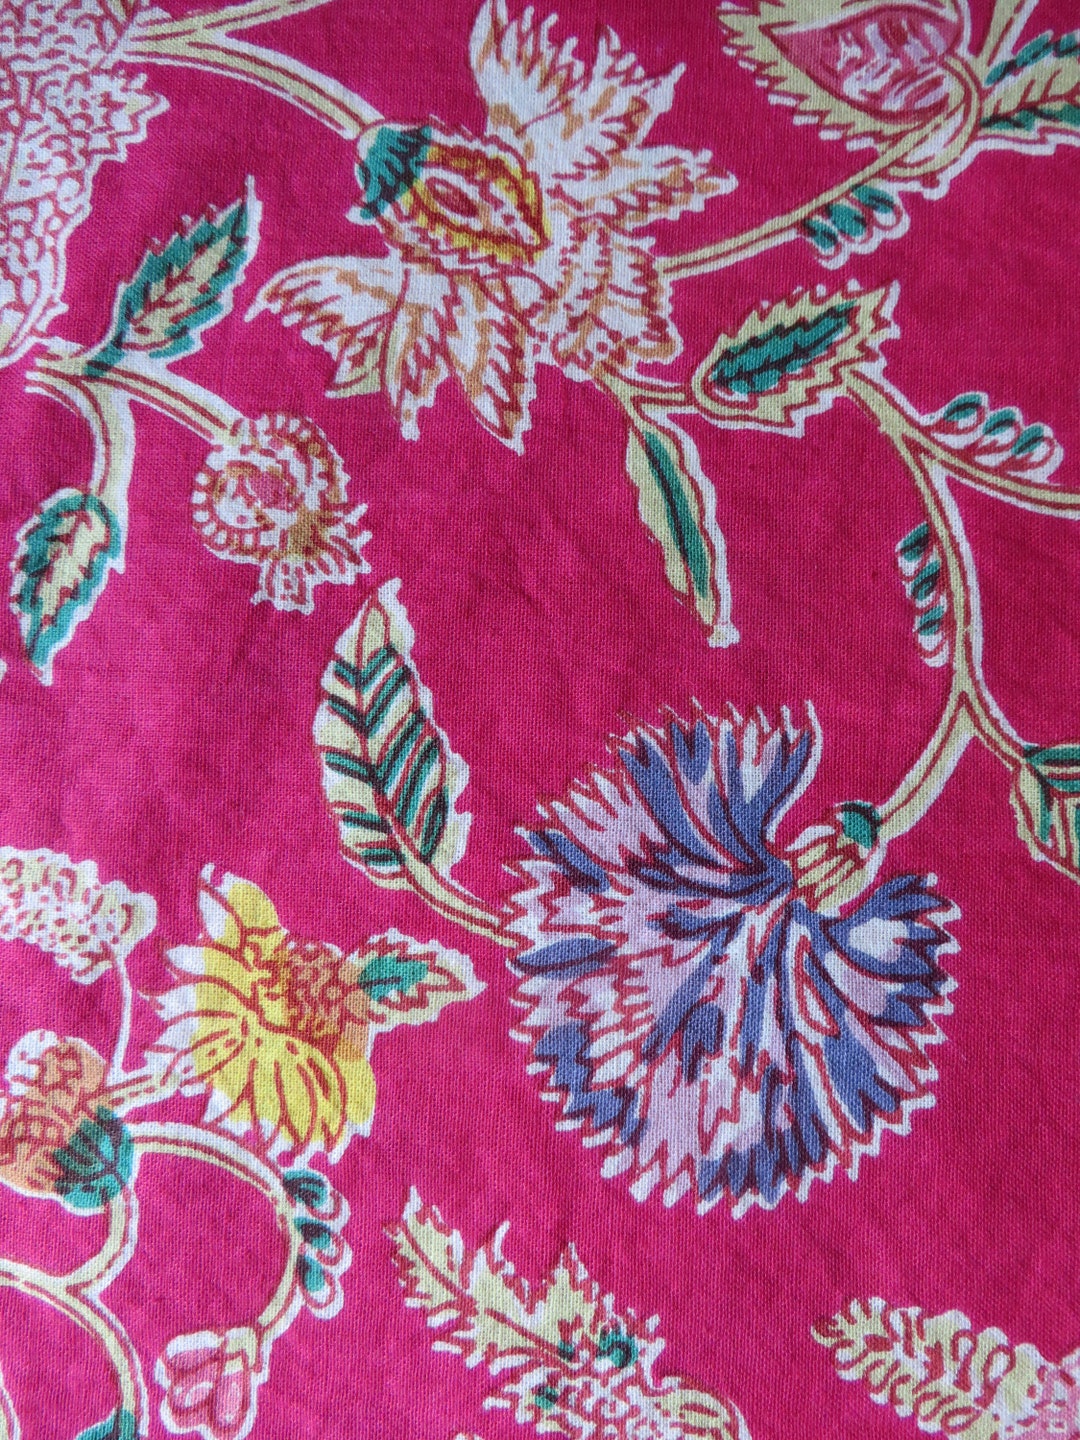 Dress Making Weight Artisan Made BLOCK PRINT Fabric From India, Floral ...